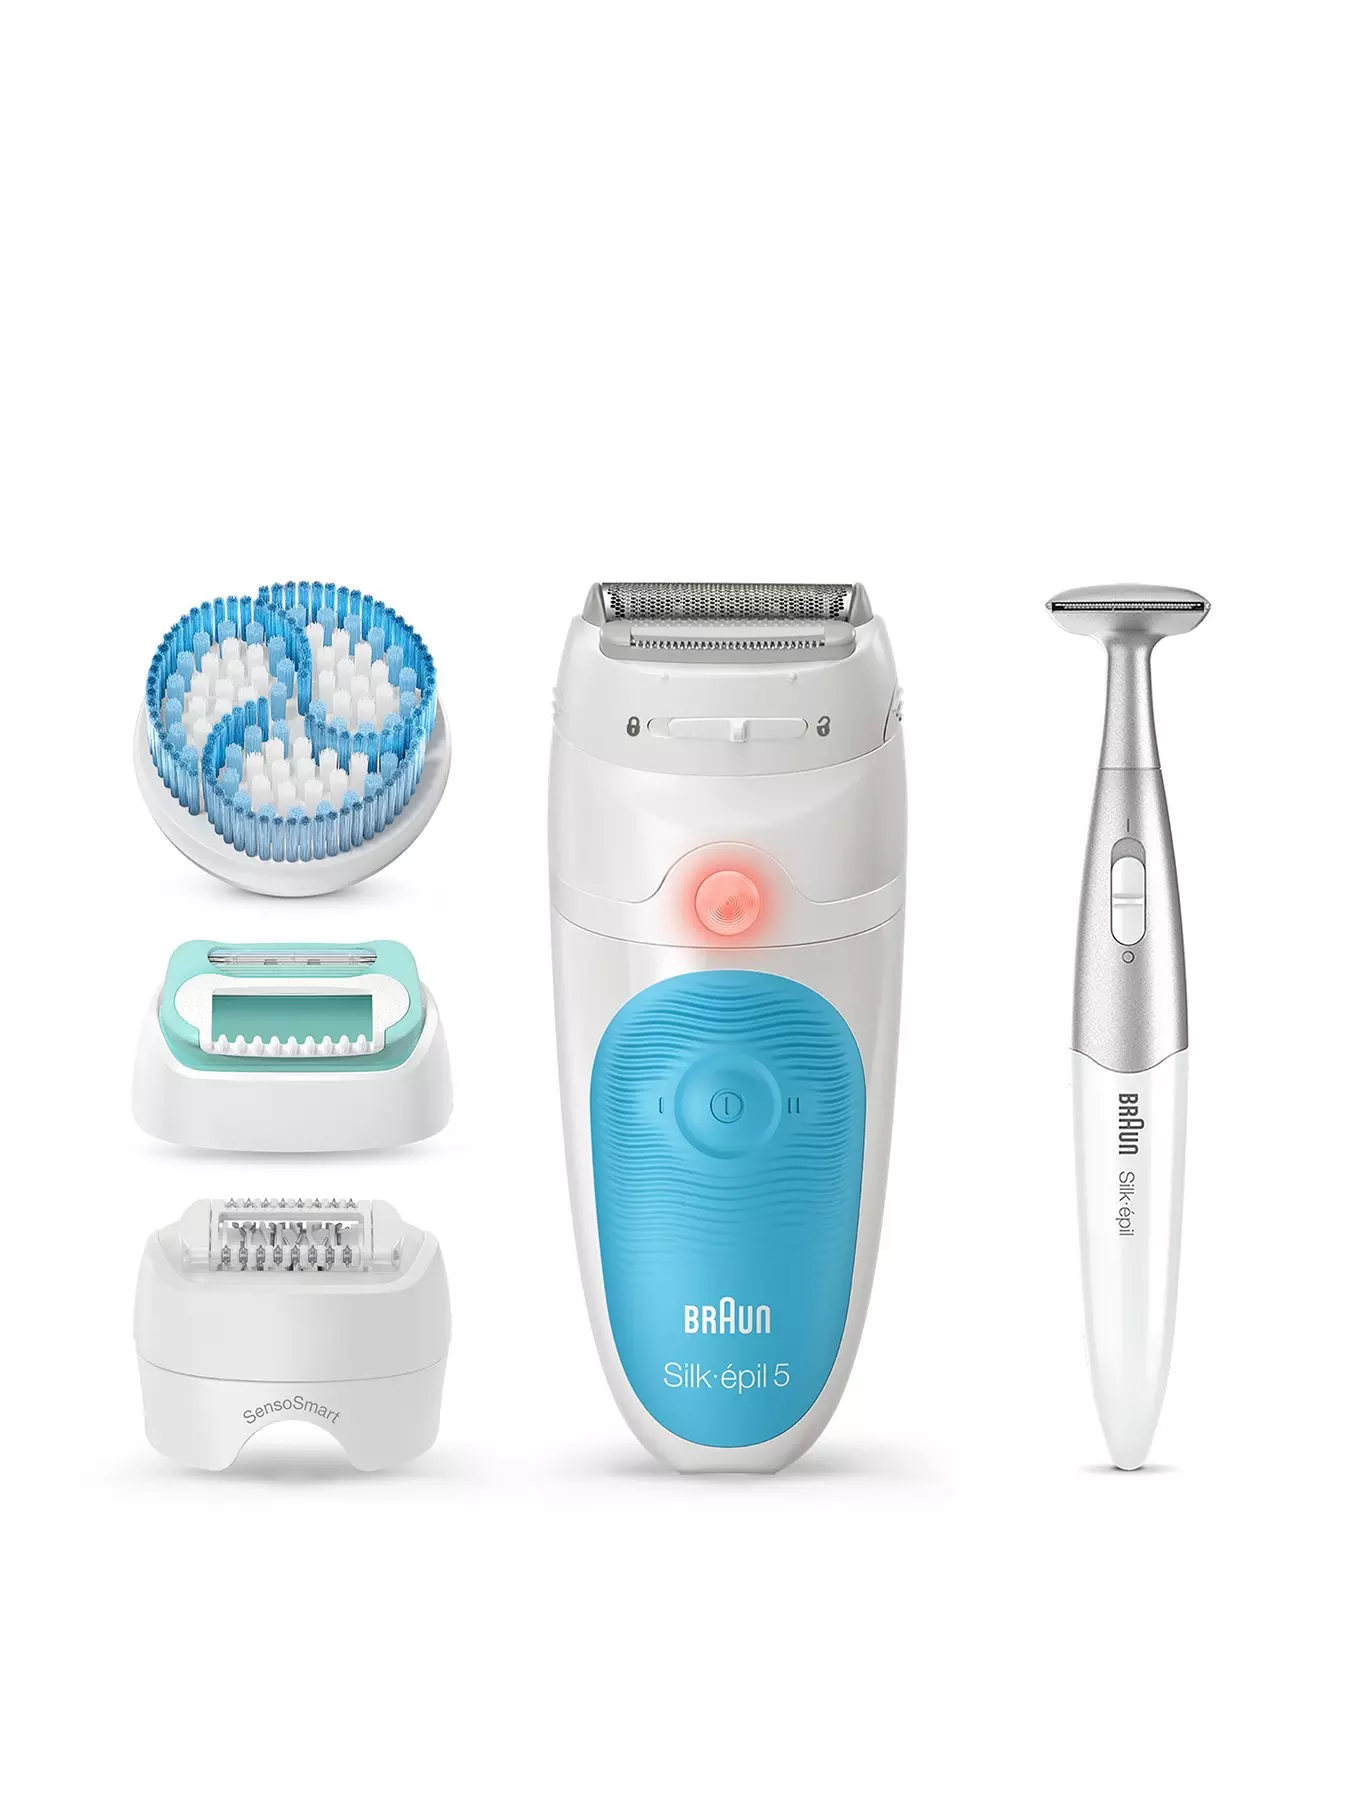 Womens hair removal, Hair & grooming, Electricals